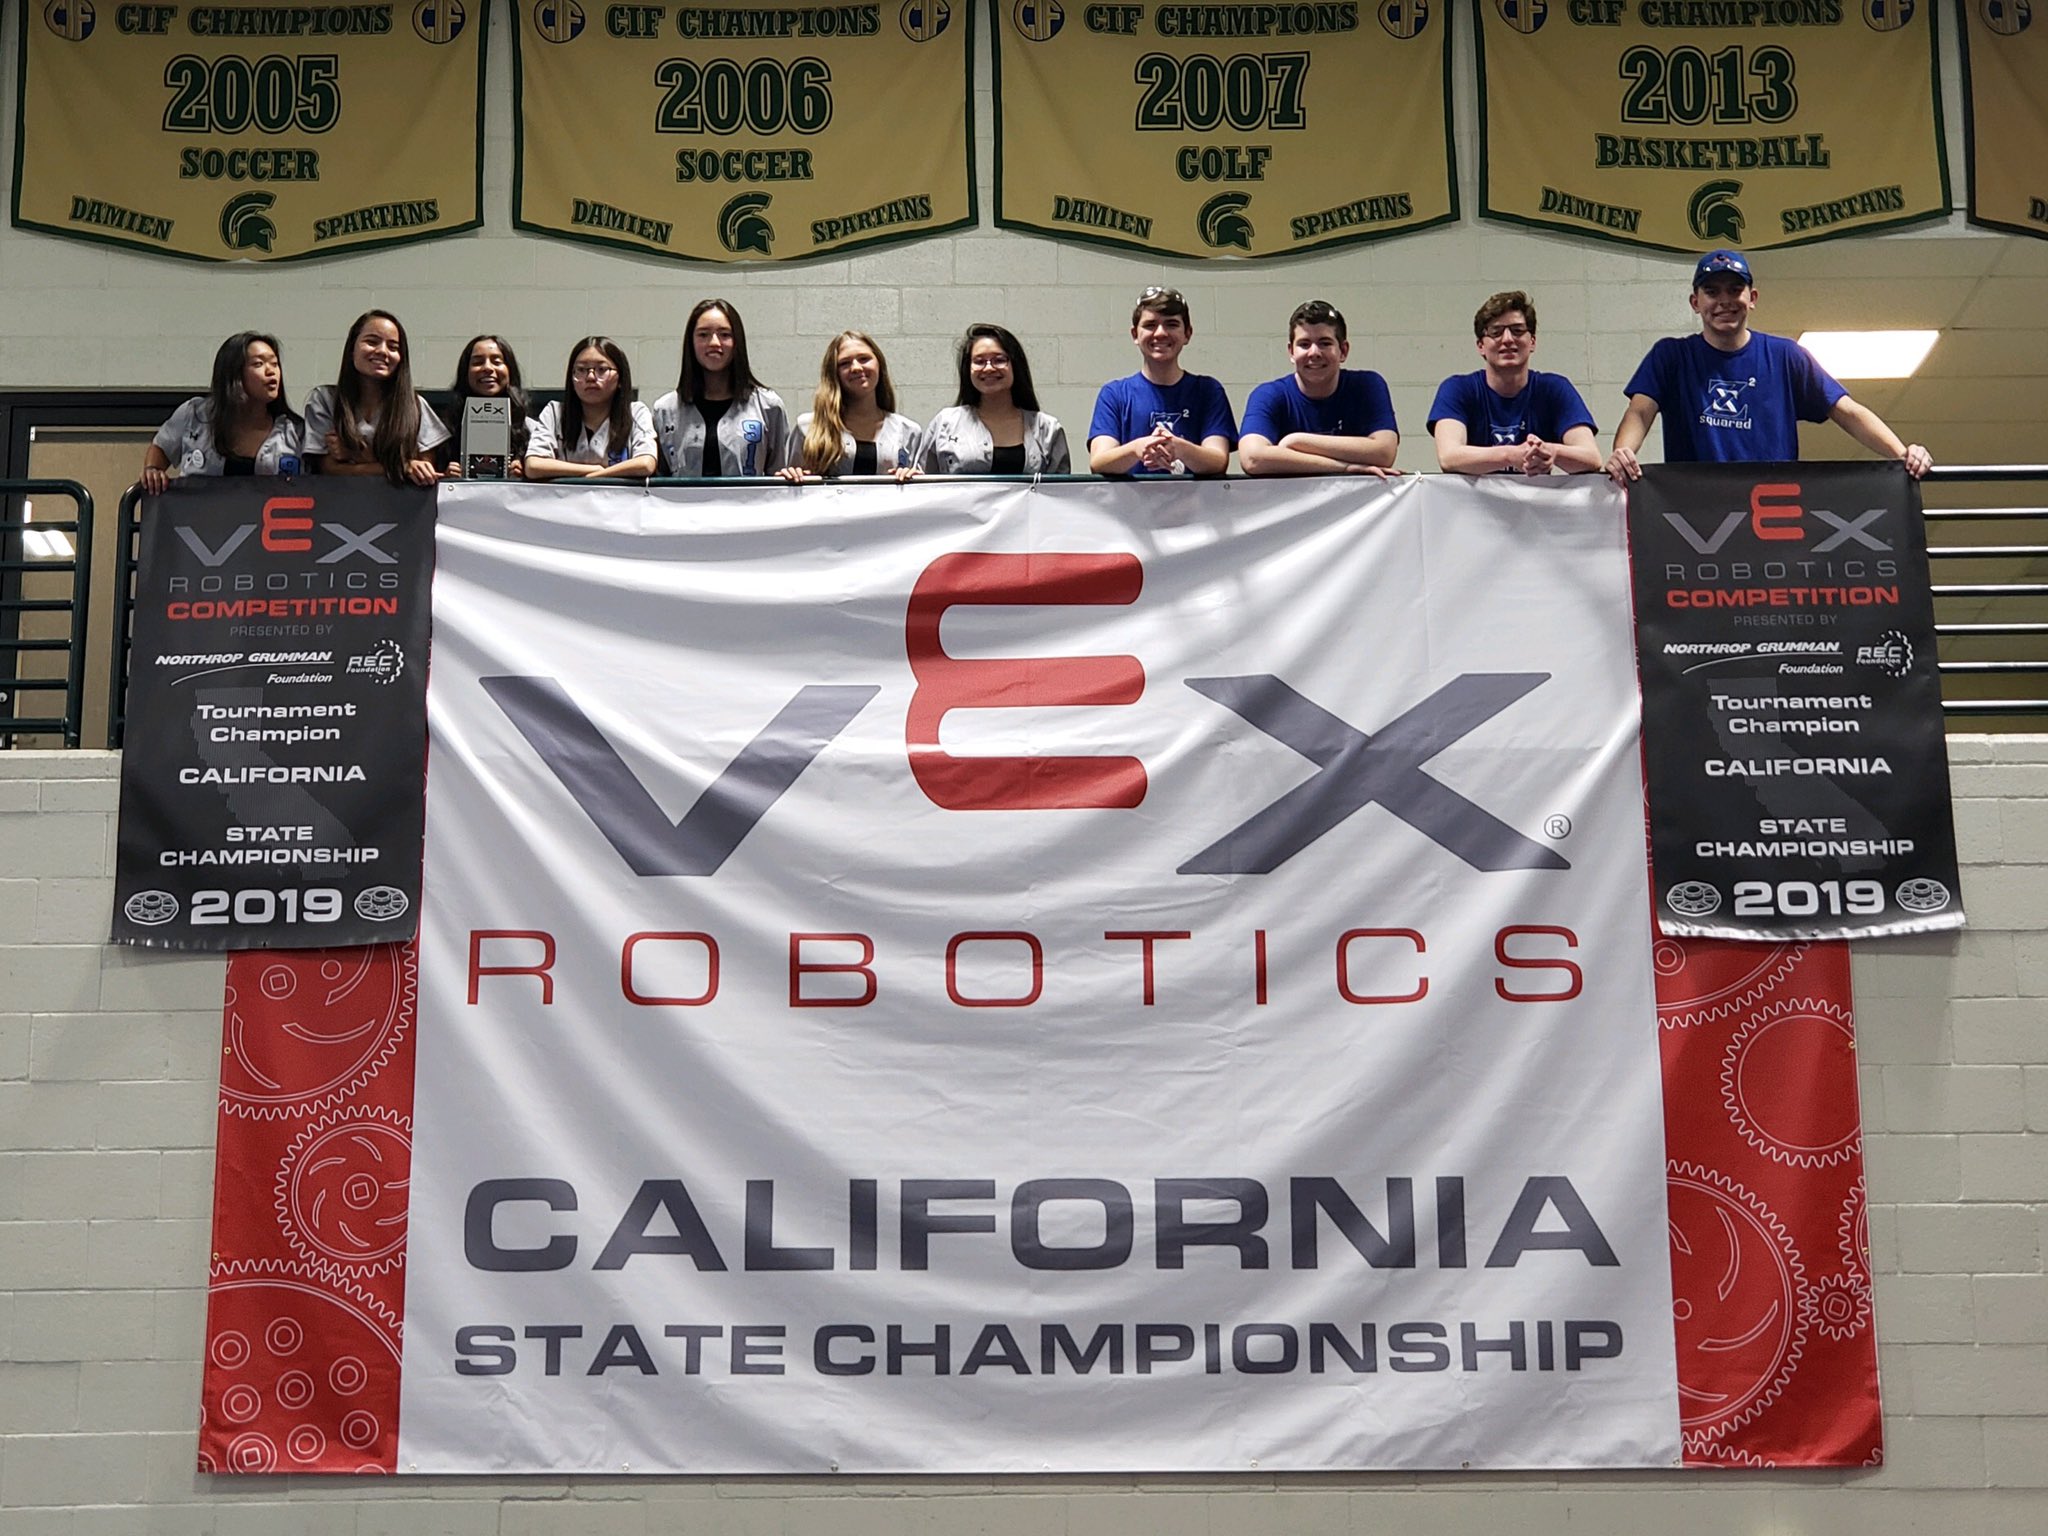 Michael Collins on Twitter "Two of our AYALA HS ROBOTICS teamsthe